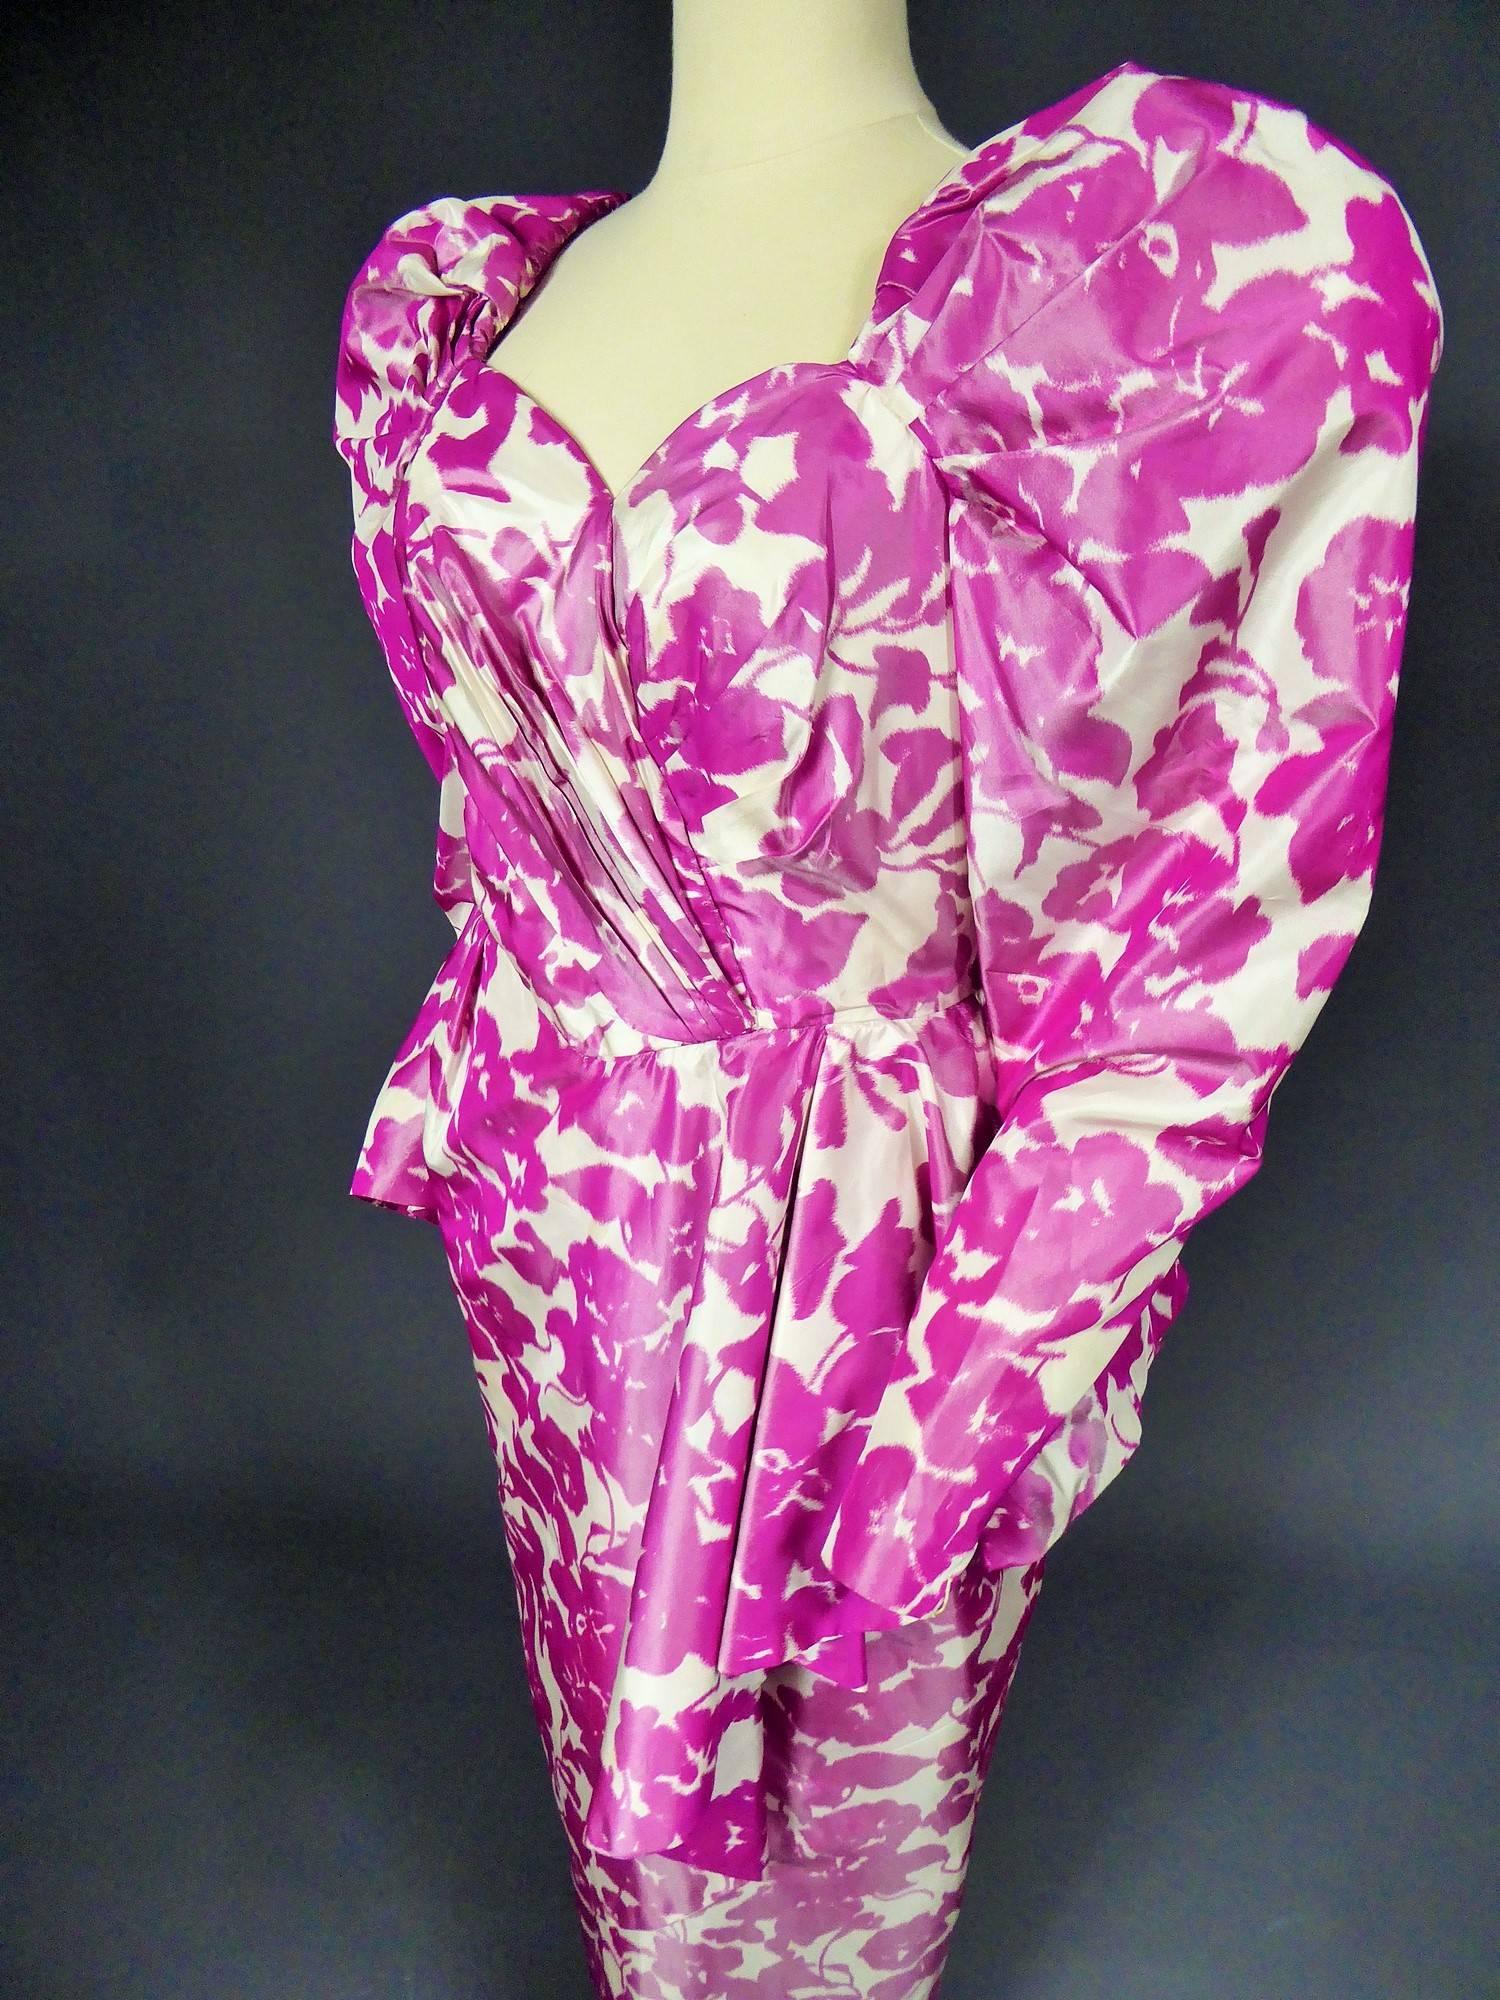 Circa 1980

France

French Fuchsia silk evening Couture dress Anonymous from the 80s. Cream silk and pink taffeta with changing effect, with floral patterns printed on the warp. Pleated and boned bustier and long gigot-sleeves. Over-skirt asymmetric